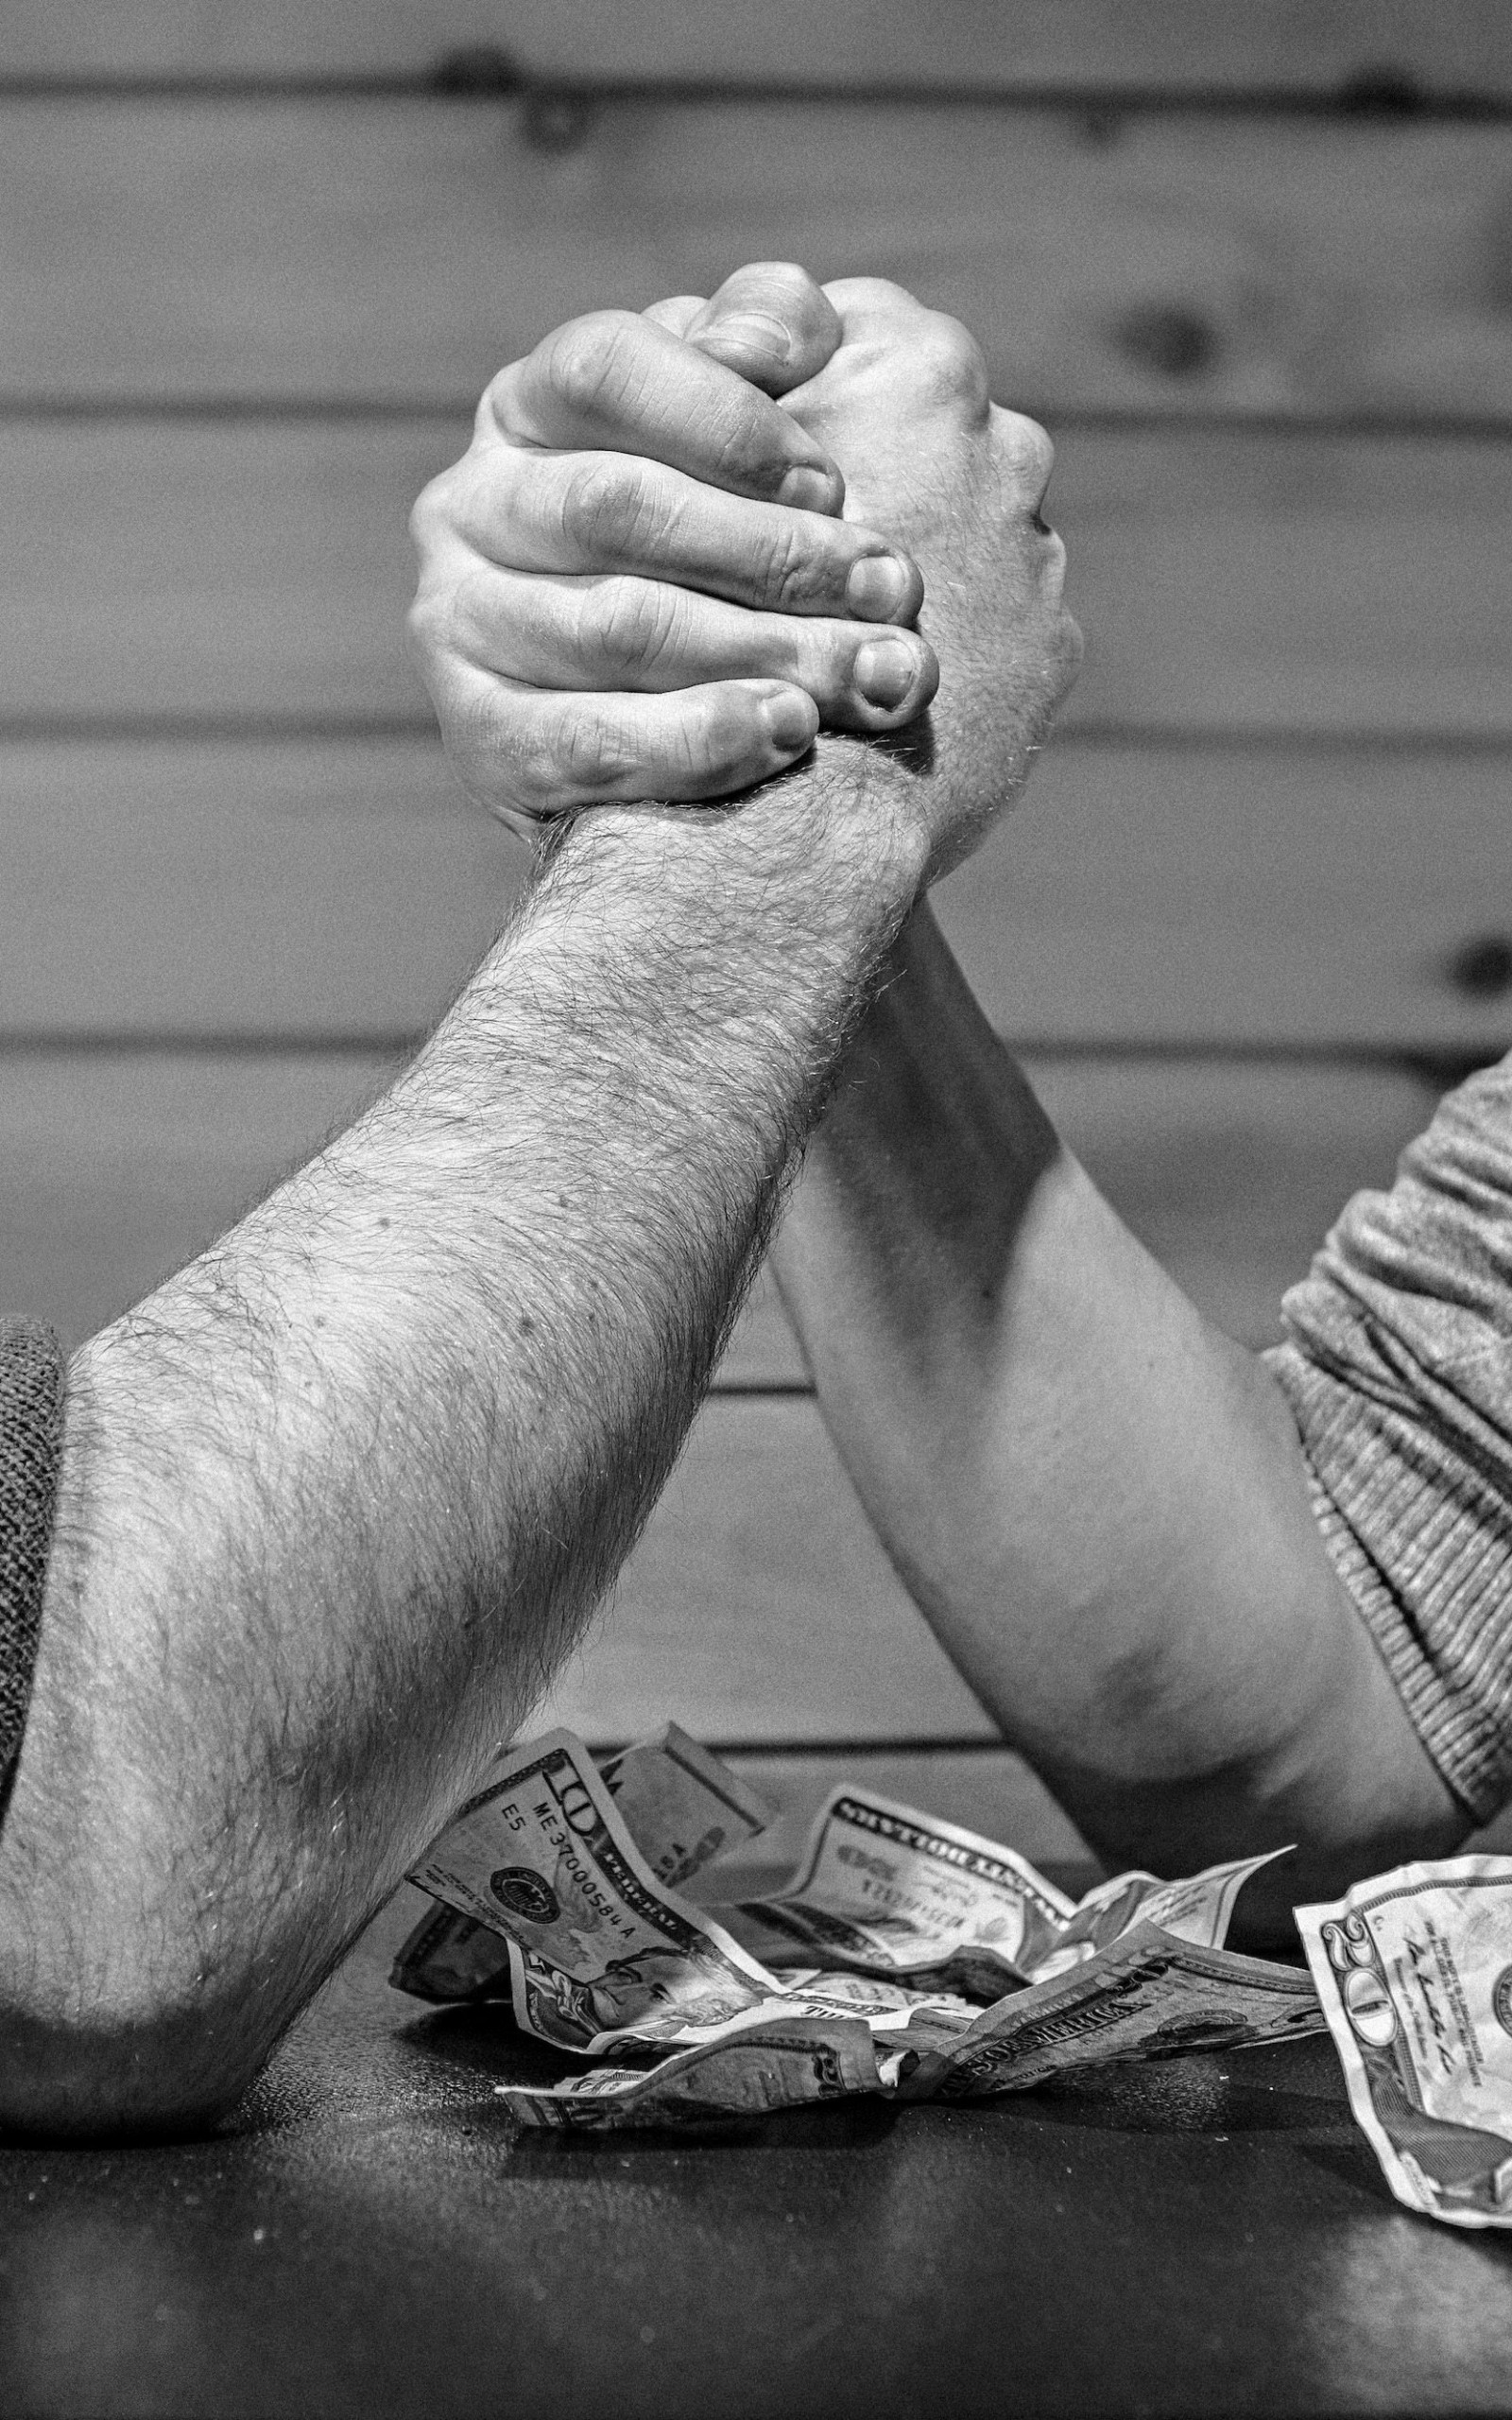 Arm Wrestling Wallpaper for Amazon Kindle Fire HDX 8.9